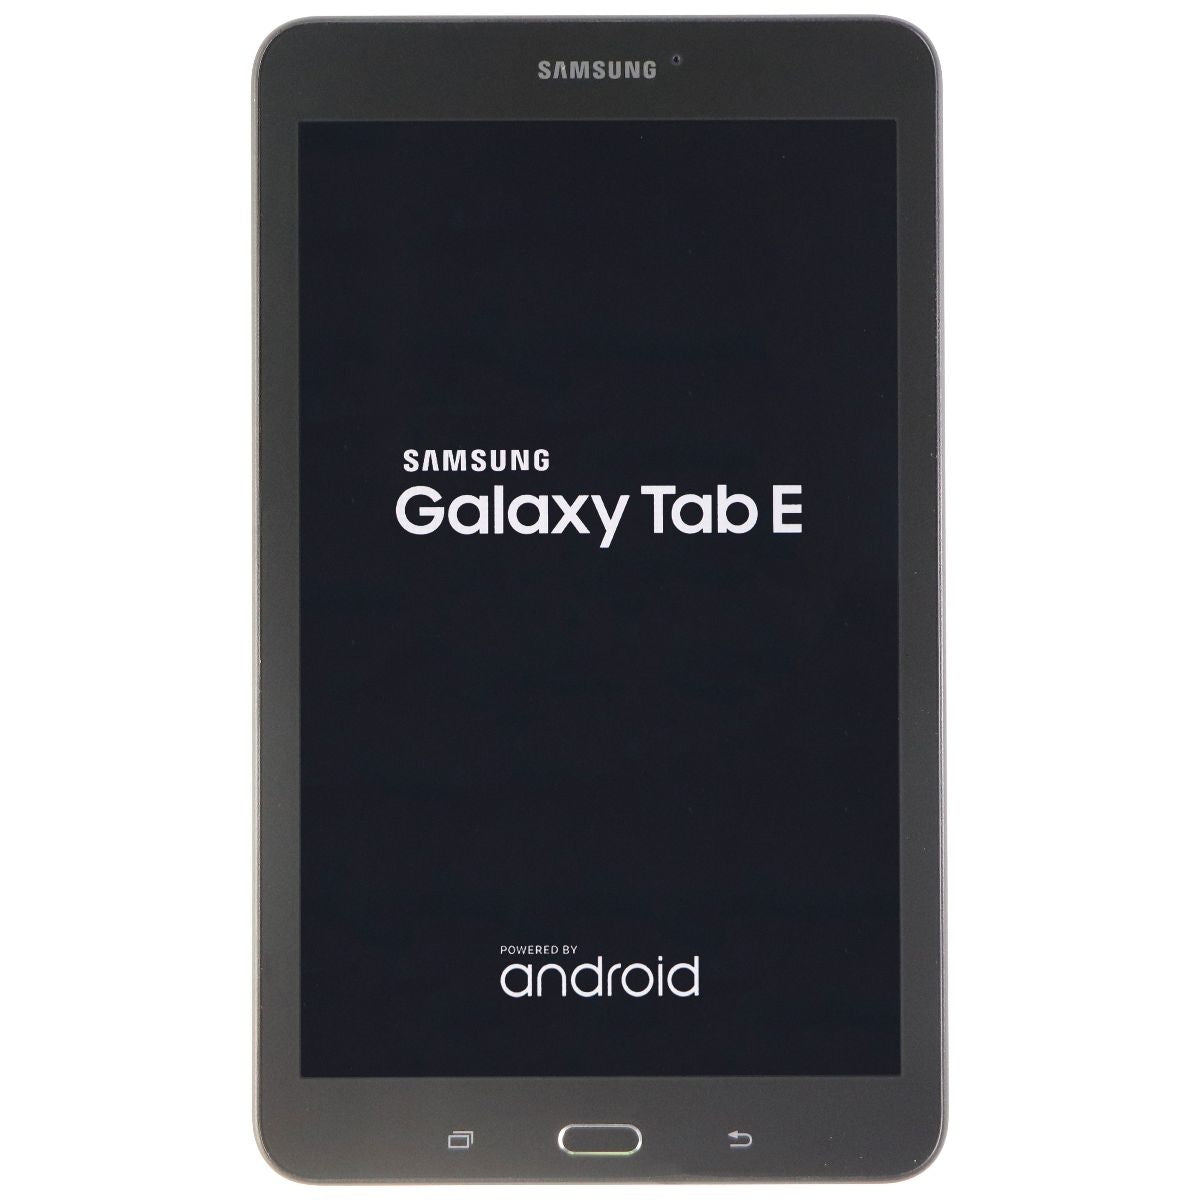 Samsung Galaxy Tab E 8.0 (SM-T377A) Tablet (AT&T Only) - 16GB / Black iPads, Tablets & eBook Readers Samsung    - Simple Cell Bulk Wholesale Pricing - USA Seller